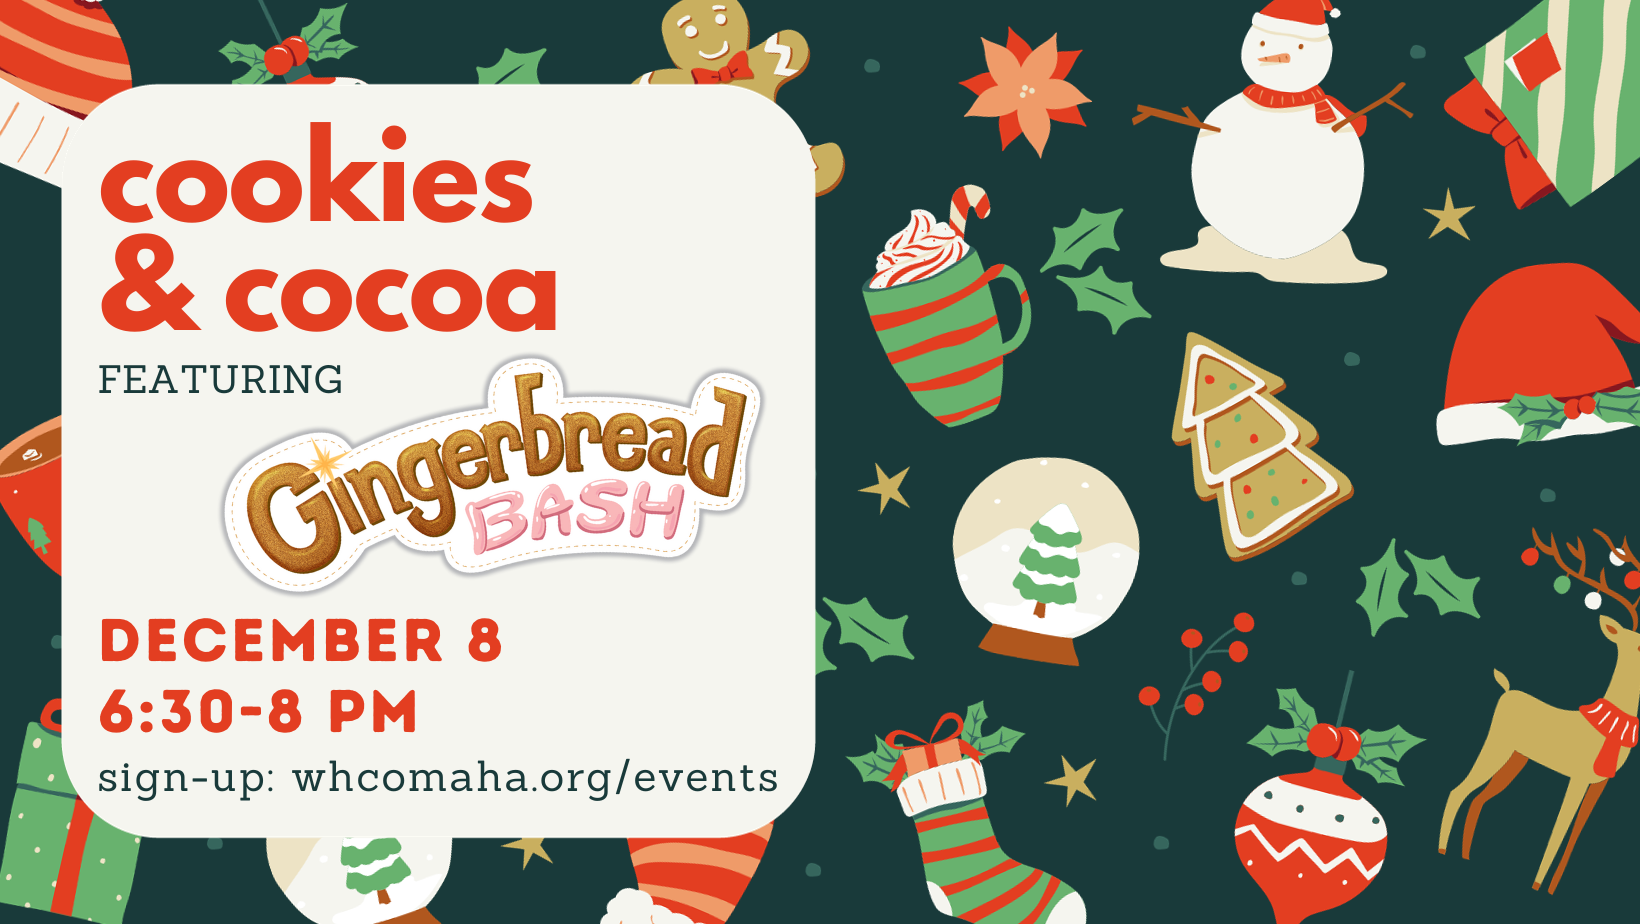 Cookies & Cocoa featuring Gingerbread BASH!